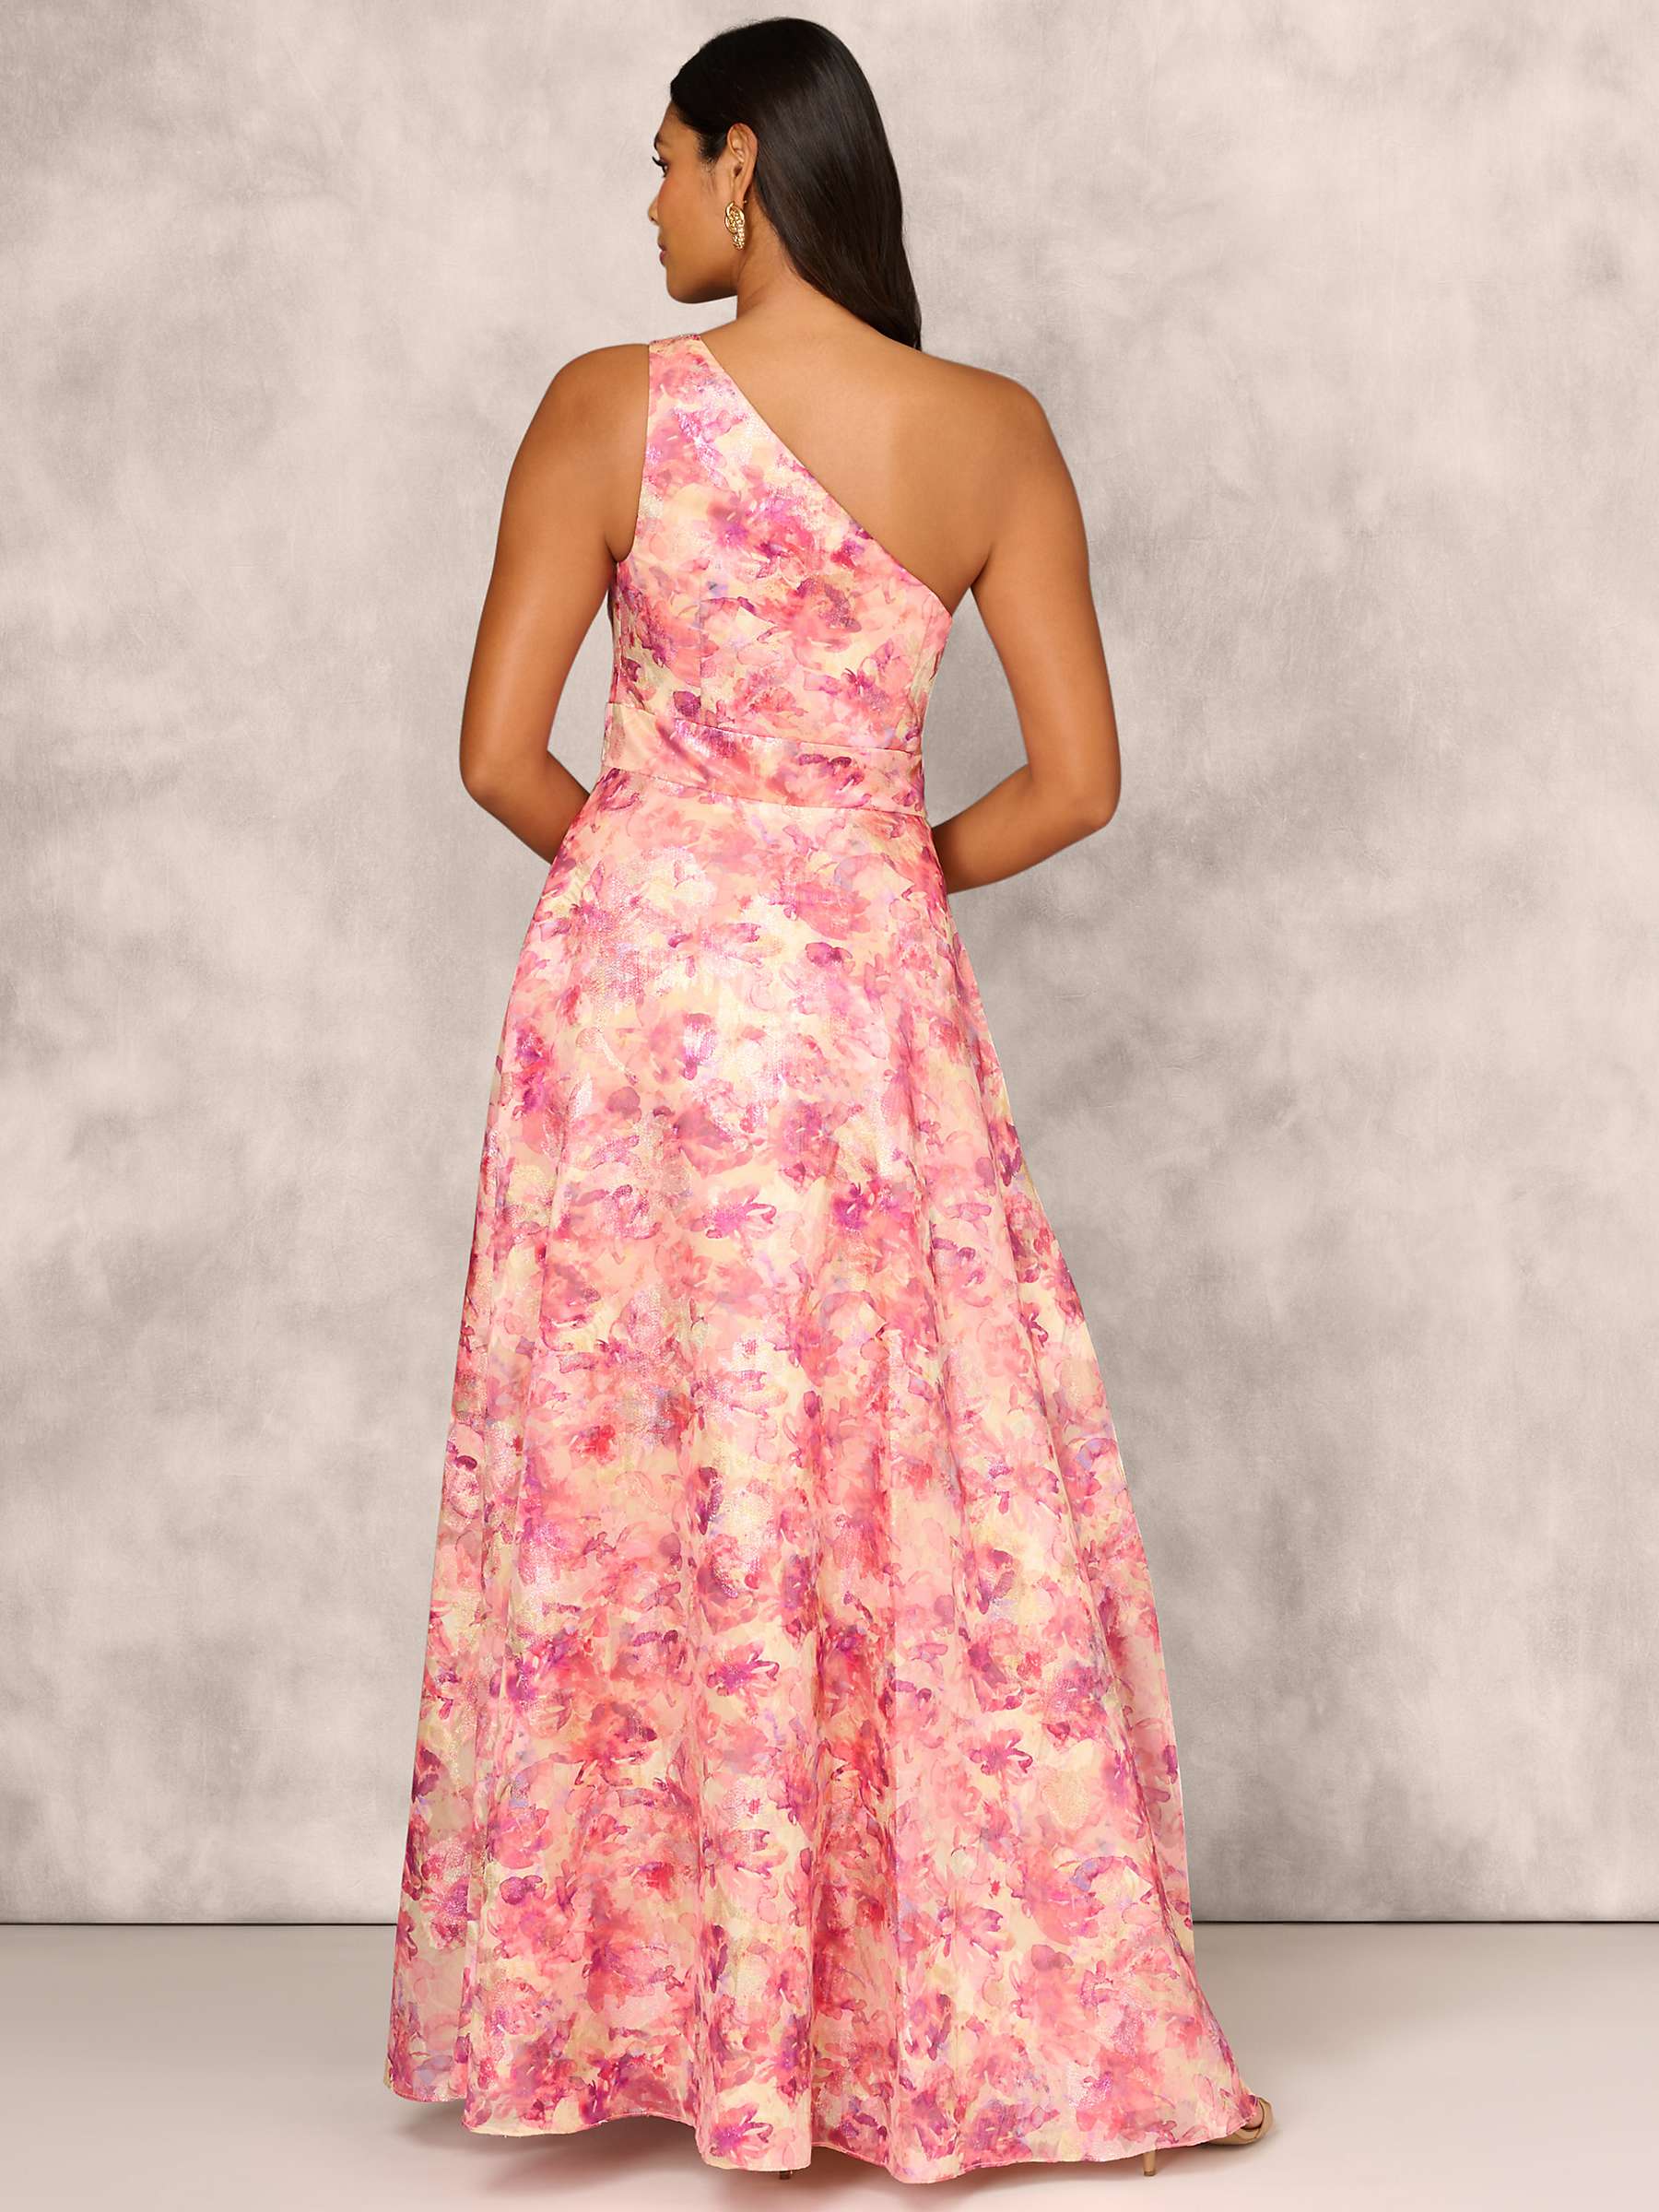 Buy Aidan Mattox by Adrianna Papell Floral Print Jacquard Maxi Dress, Red/Multi Online at johnlewis.com